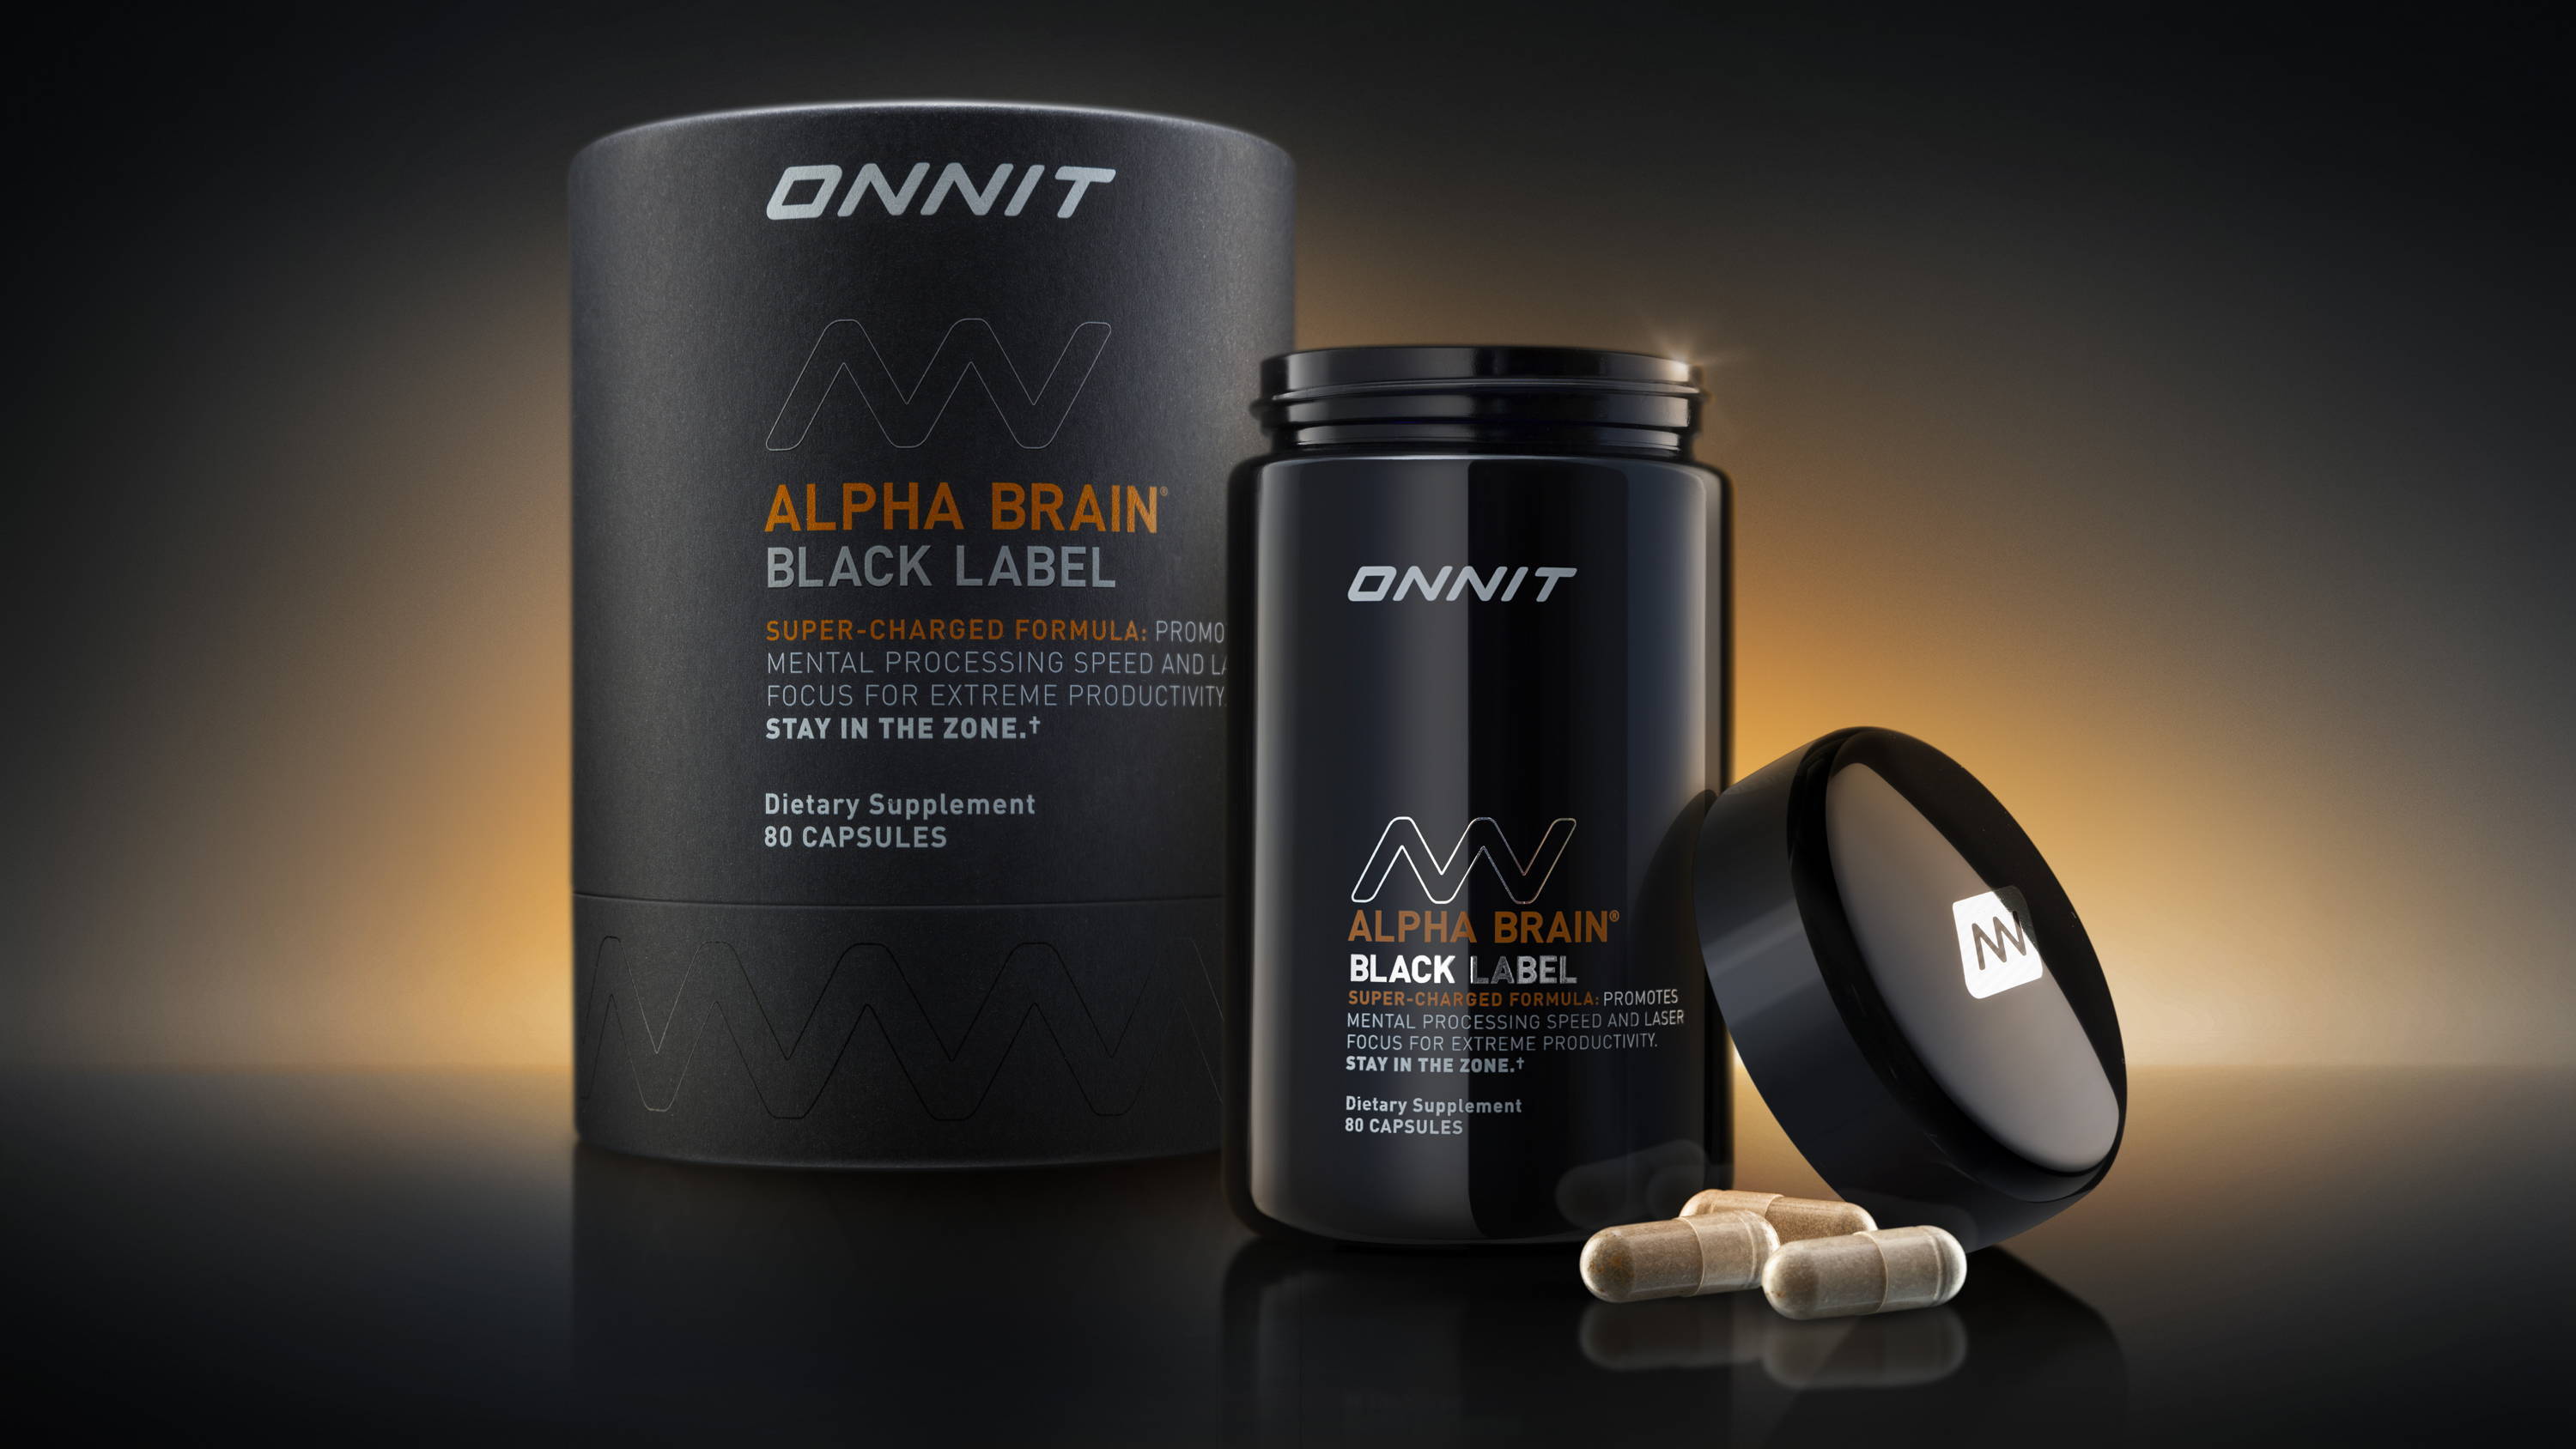 Onnit Dietary Supplement